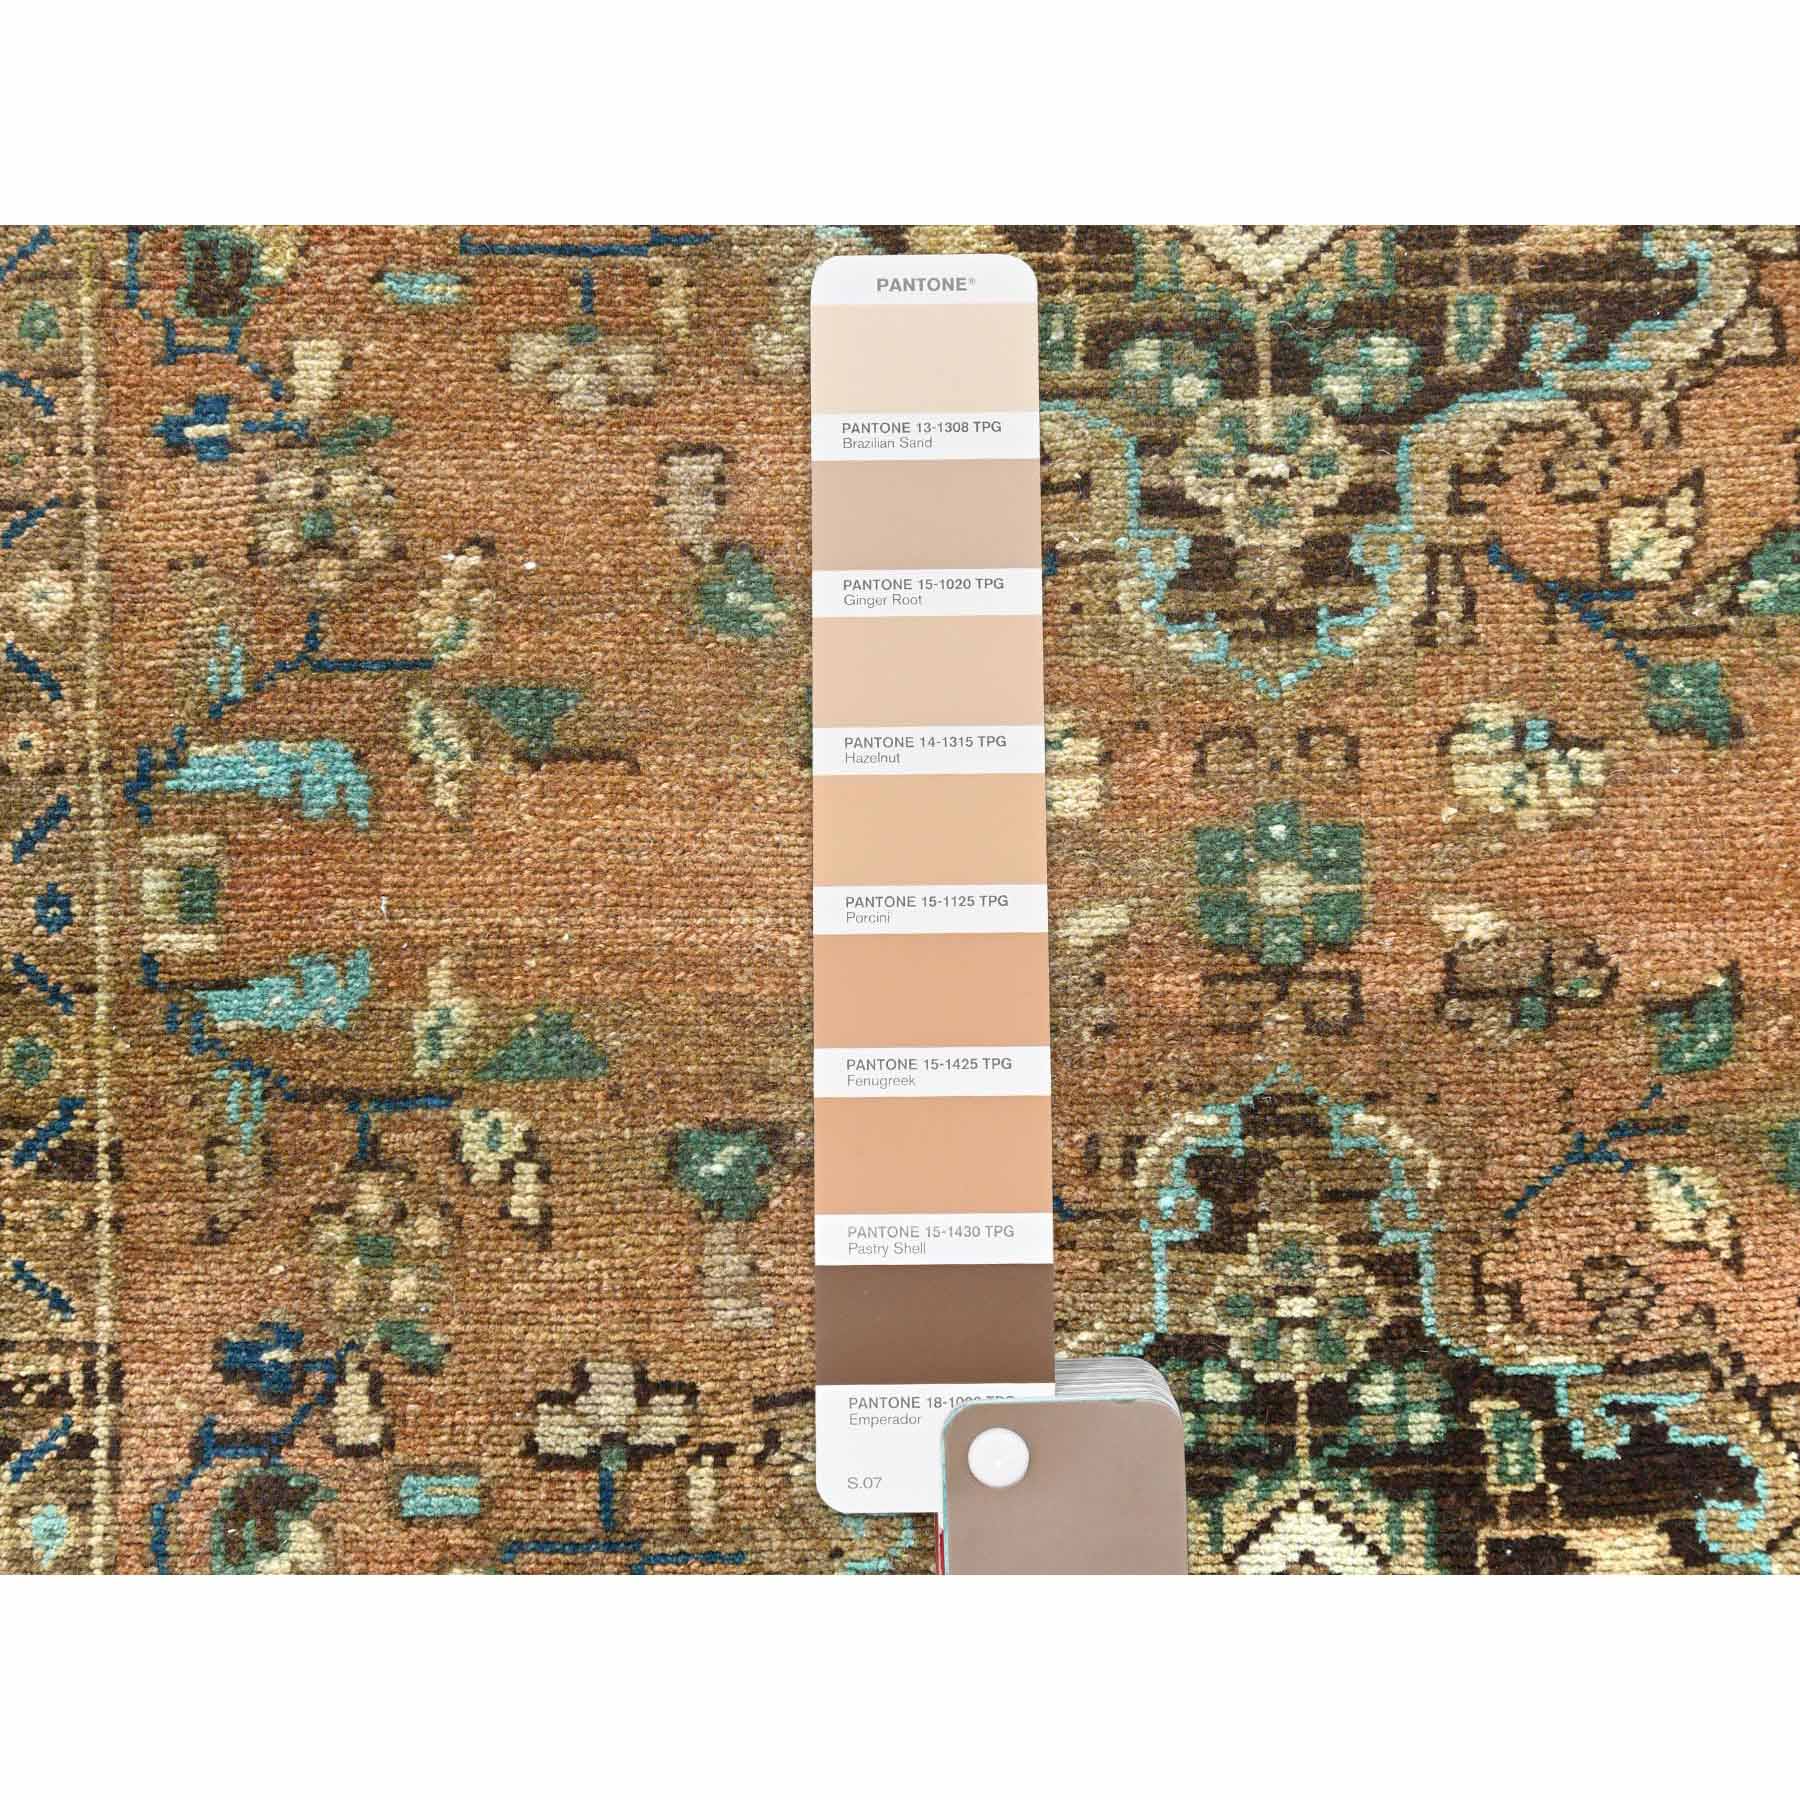 Overdyed-Vintage-Hand-Knotted-Rug-408245